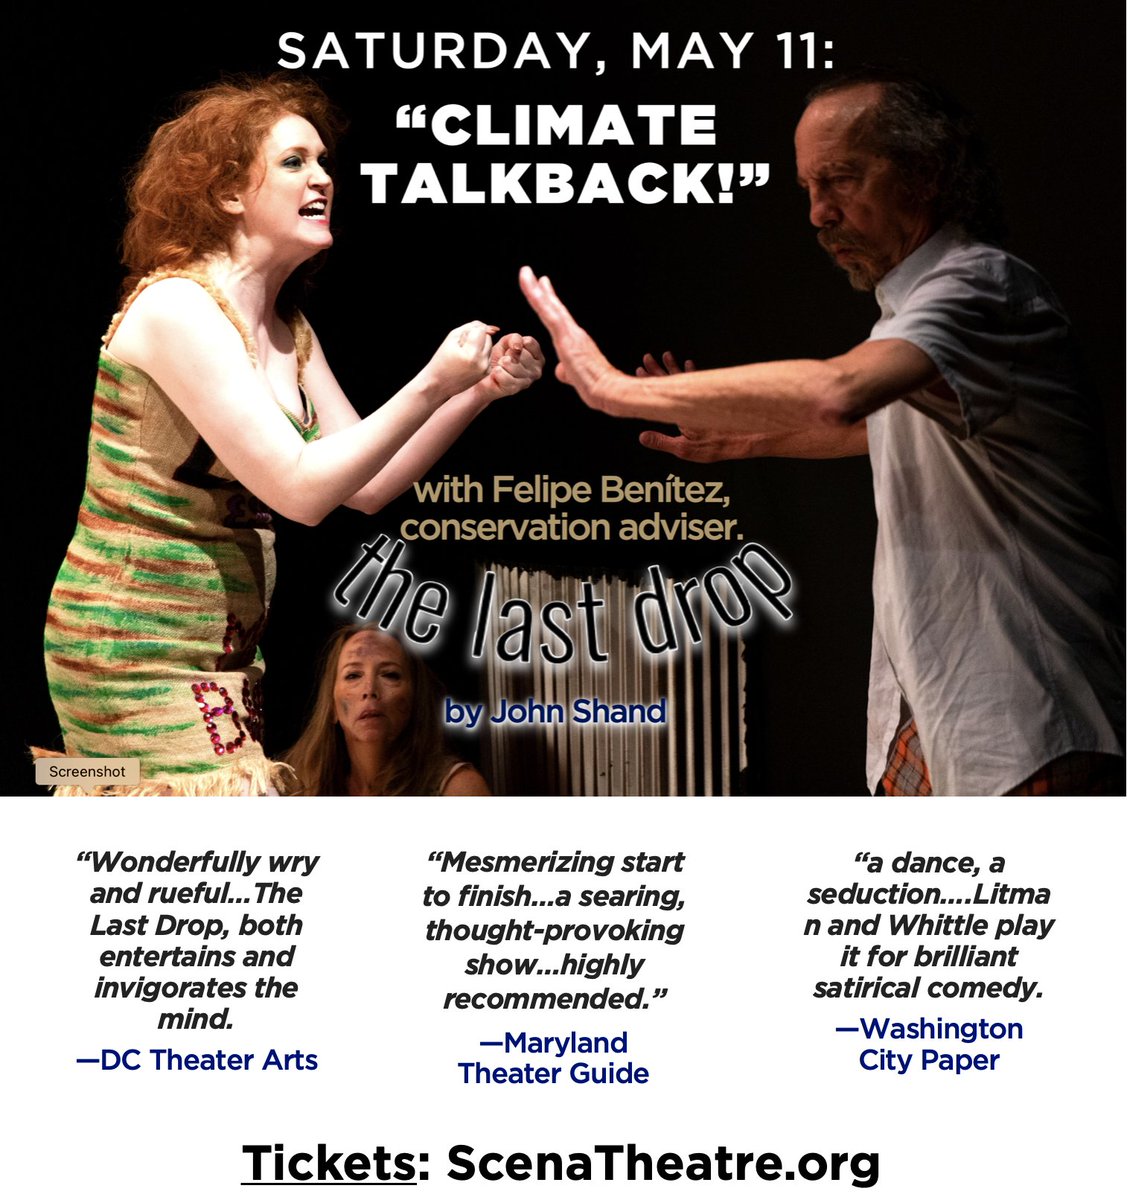 Final Weekend! See our wild dark comedy The Last Drop & enjoy a lively chat on the climate debate after our Sat. show. Moderator @fbenitezdc of @corazon_latin has advised leaders on #sustainability. #dc #dcshows #dcentertainment #ClimateCrisis  
TICKETS: ScenaTheatre.org.